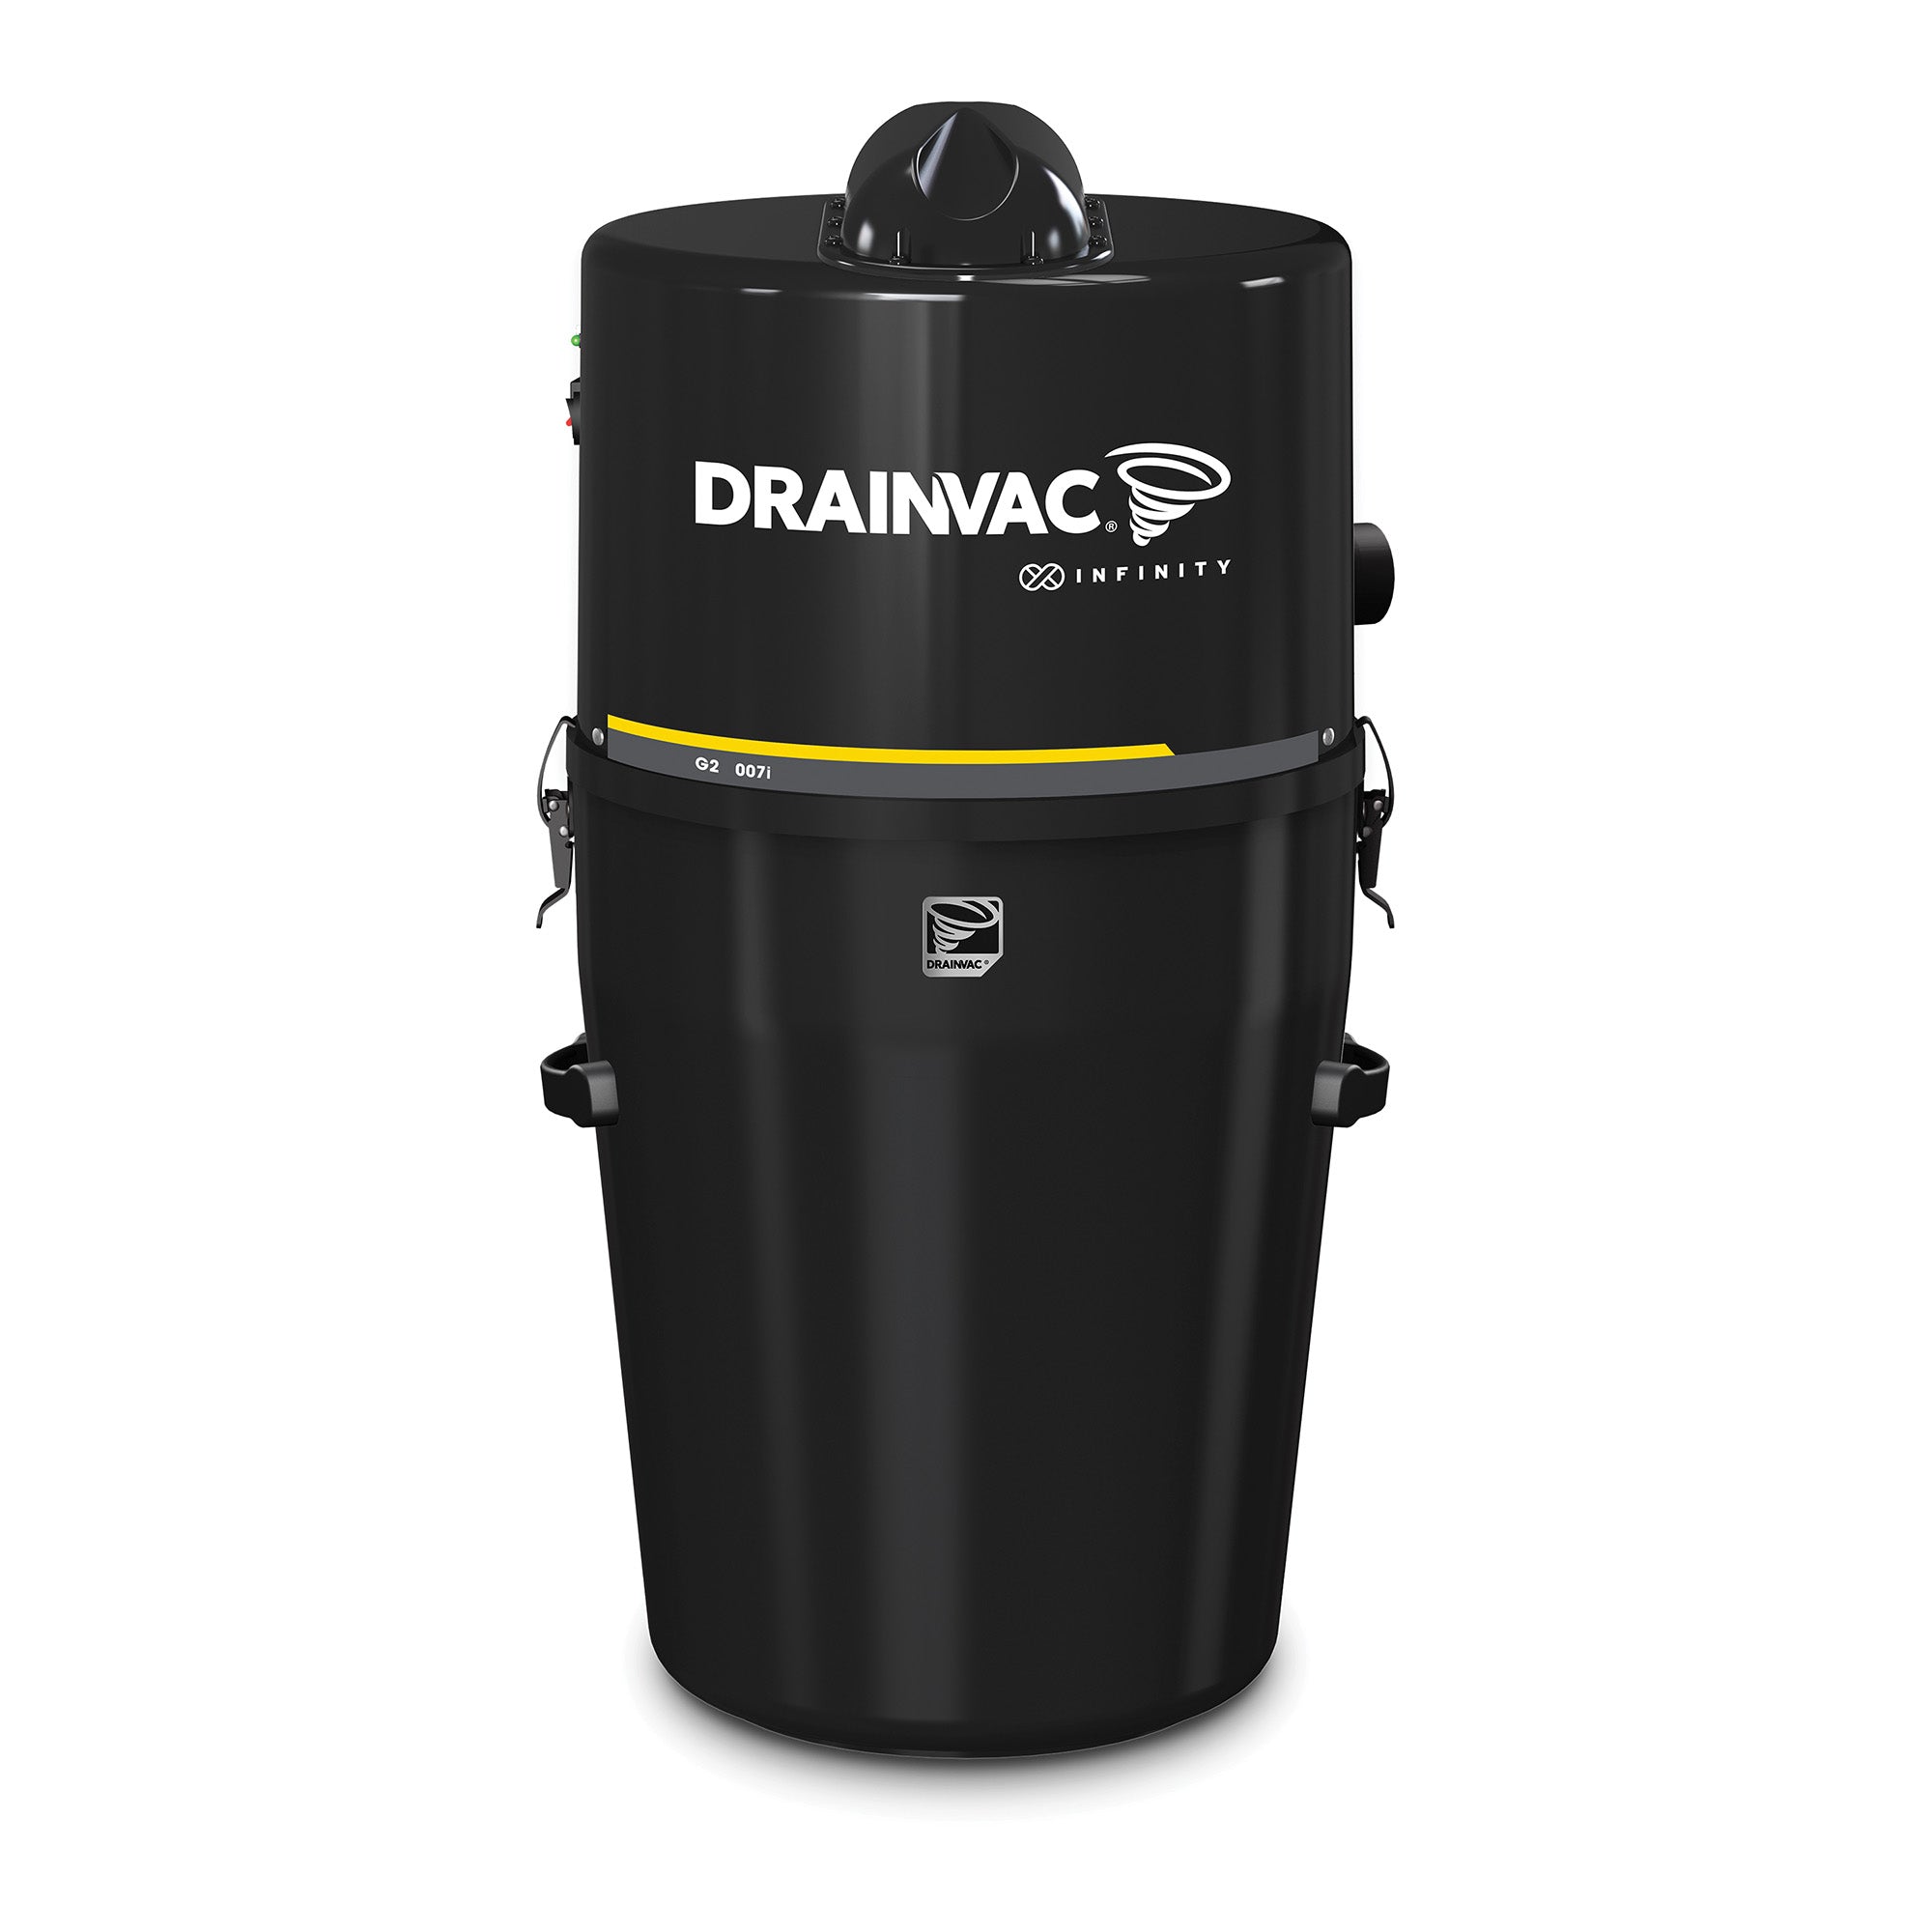 DrainVac G2-007i Infinity Residential Central Vacuum Power Unit